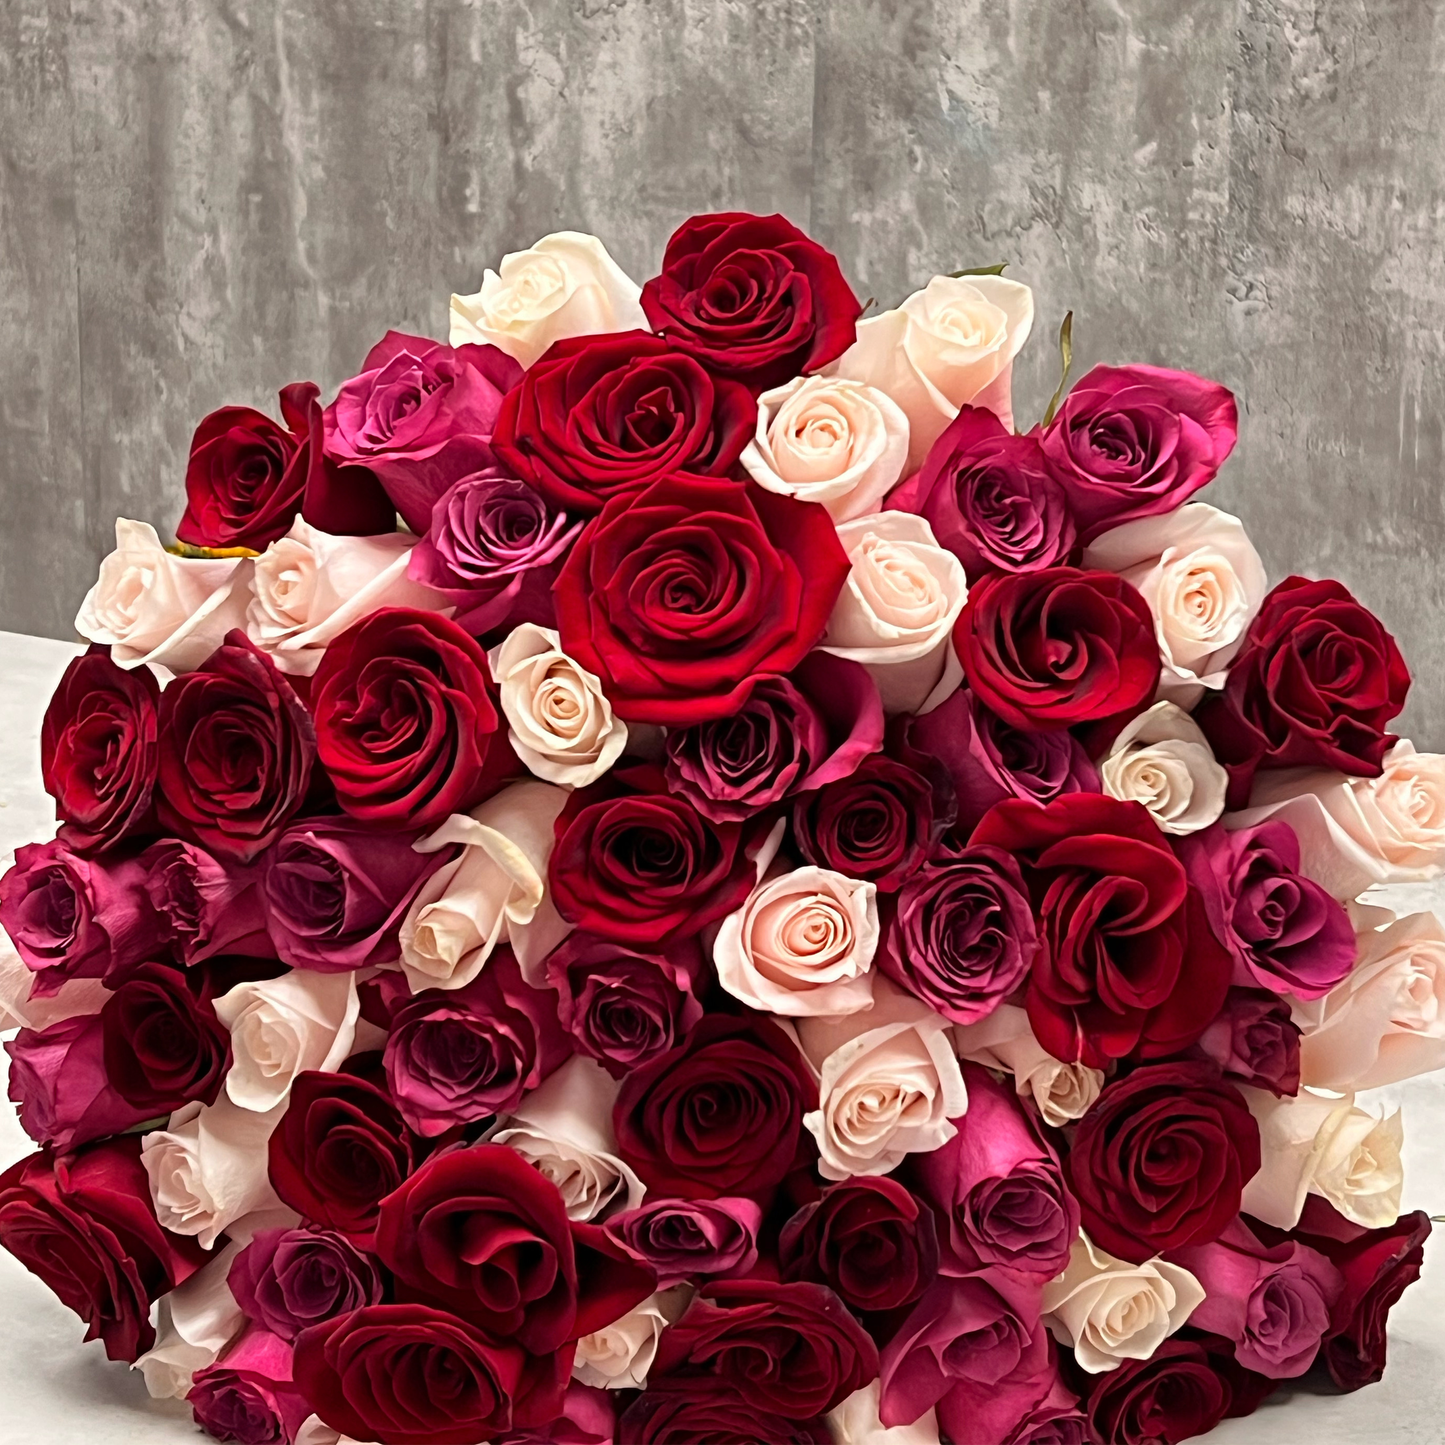 A breathtaking arrangement of pink, red, and white long-stemmed roses, symbolizing love and passion. Perfect for Valentine's Day, available for local delivery in Miami, FL, and nationwide shipping. Up to 50 roses for a grand gesture of affection. Select February 13 for faster delivery. Limited stock - order now for a truly memorable celebration